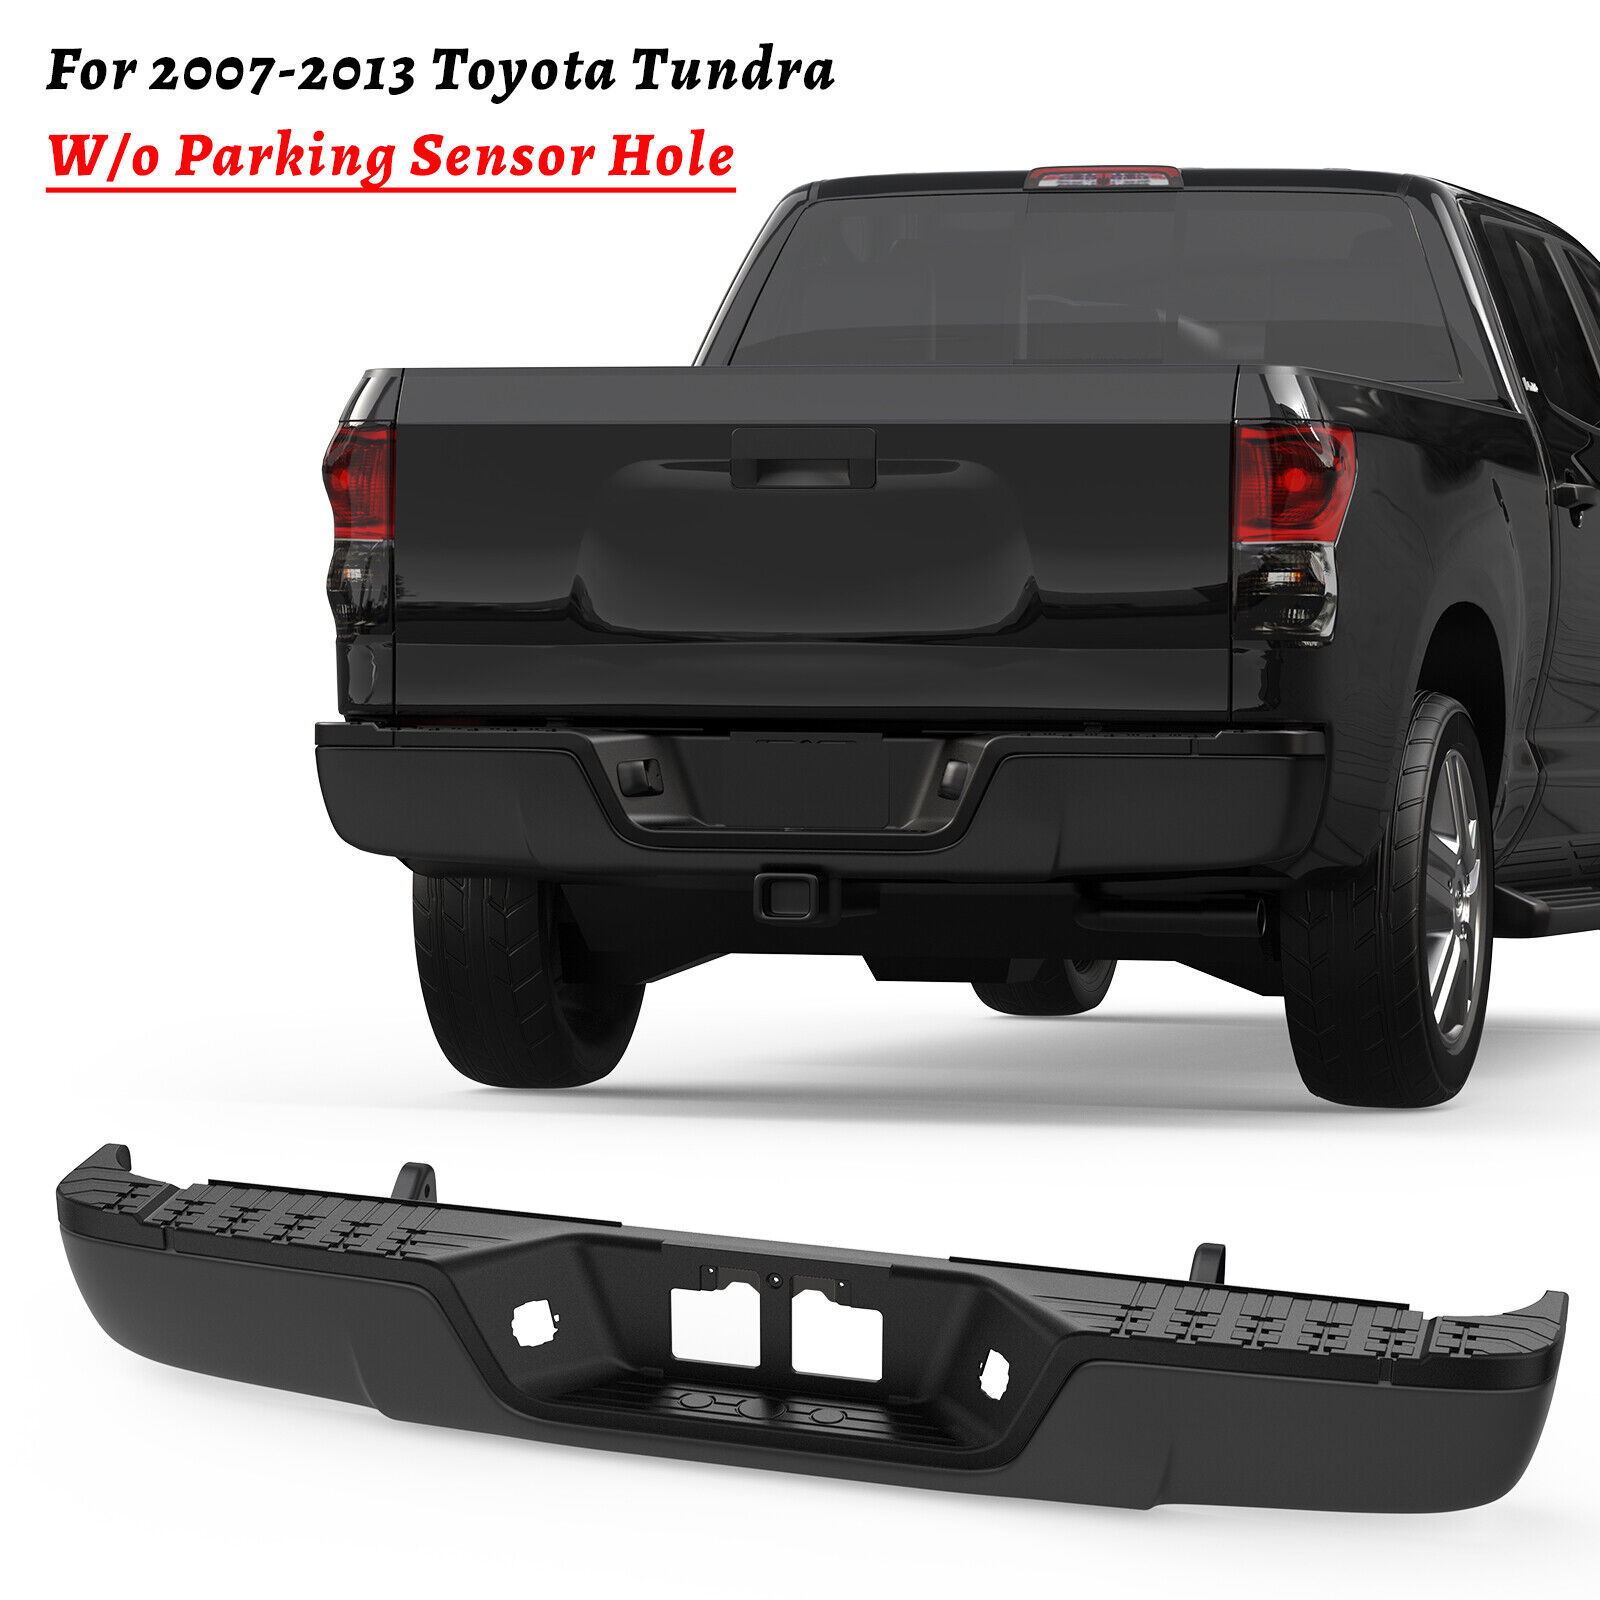 Black Rear Step Bumper Assembly For 2007-2013 Toyota Tundra W/o Park Assist